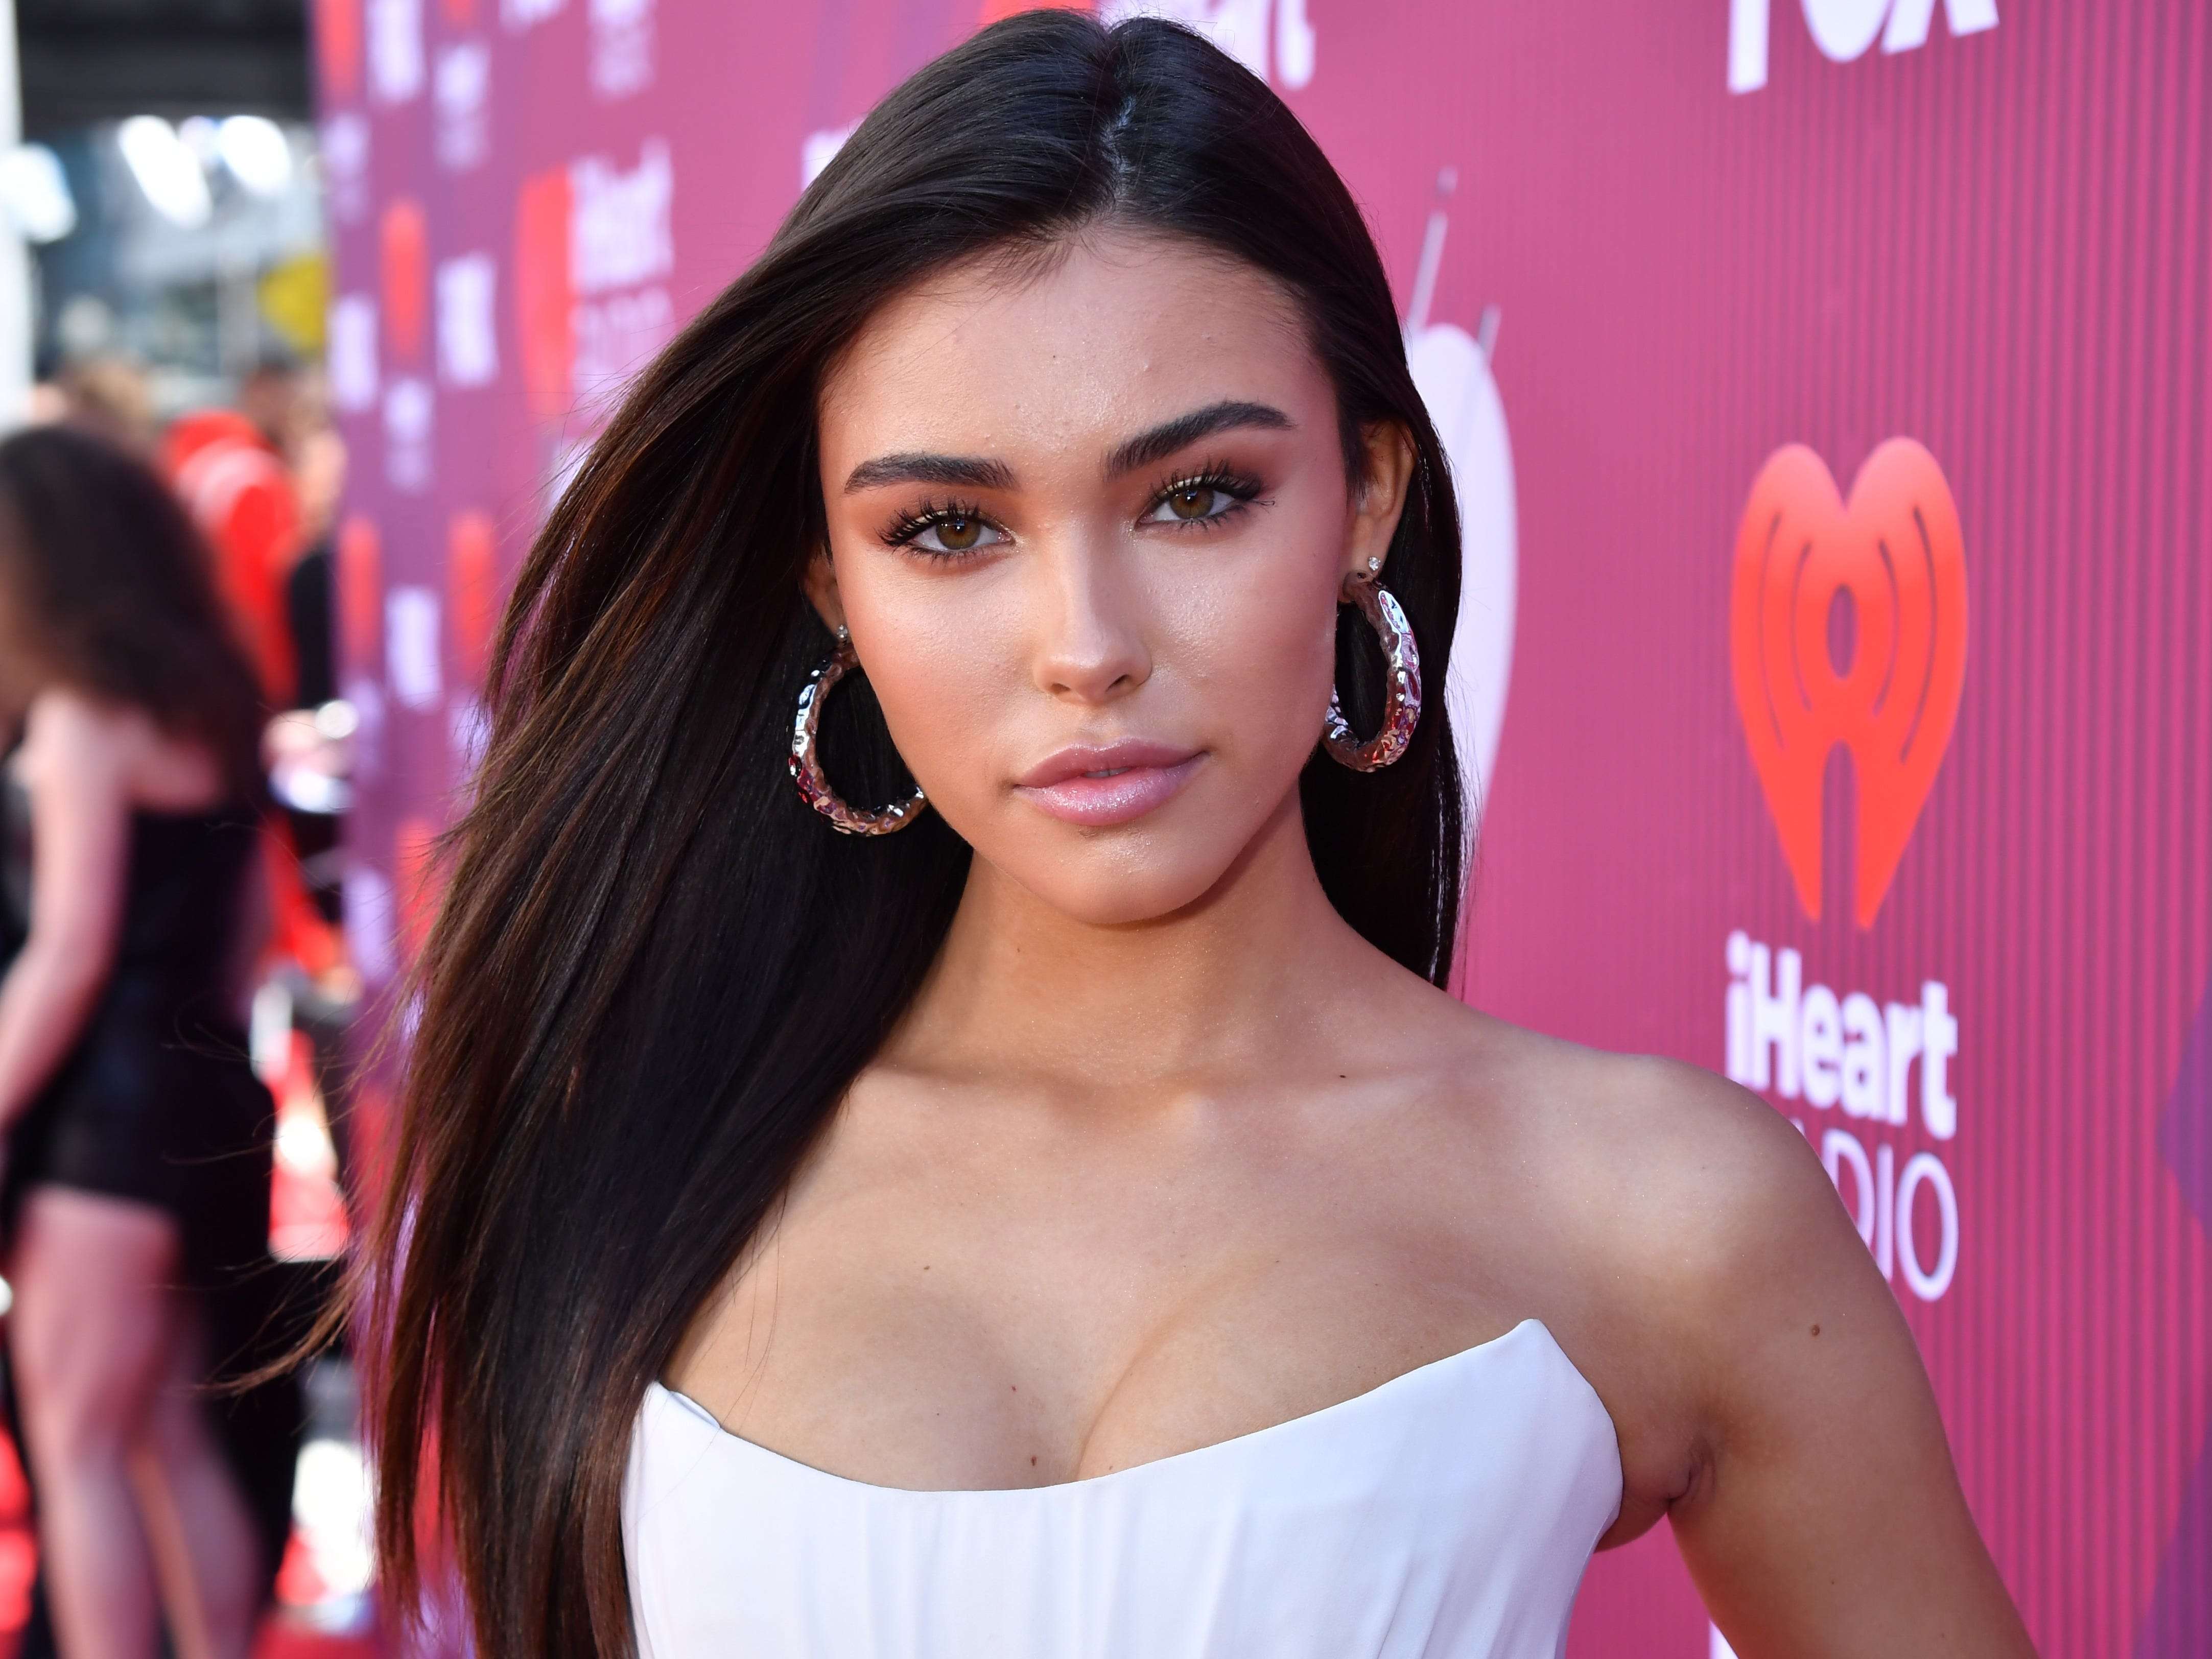 20-things-you-probably-didnt-know-about-Madison-Beer.jpg